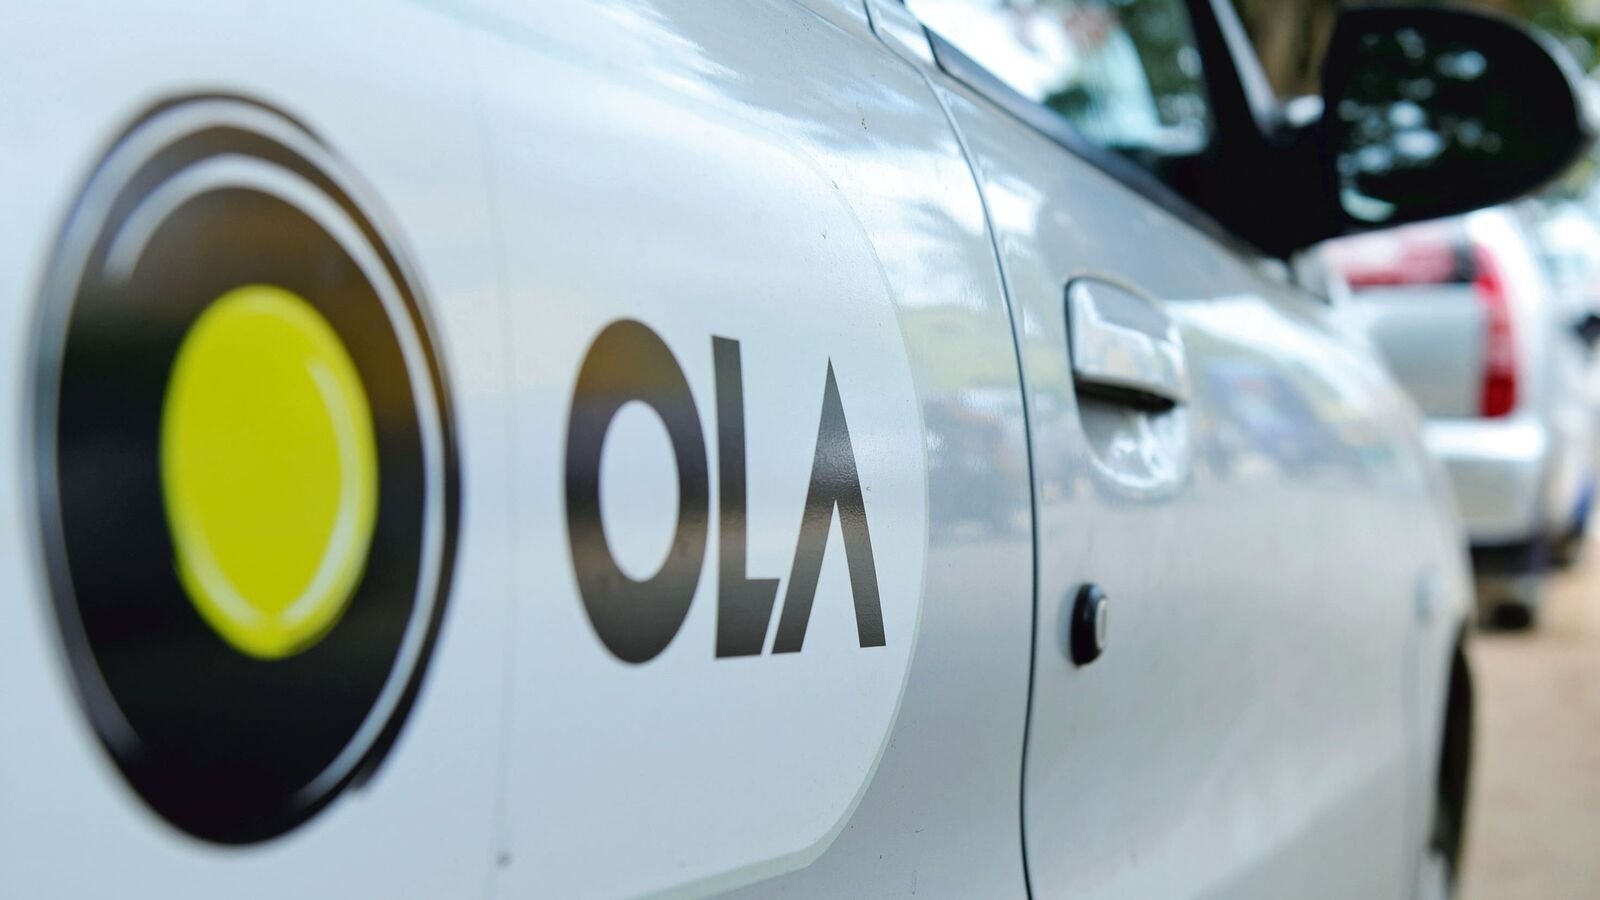 Ola Cabs CEO Hemant Bakshi resigns; company to lay off 10% of staff ahead of IPO